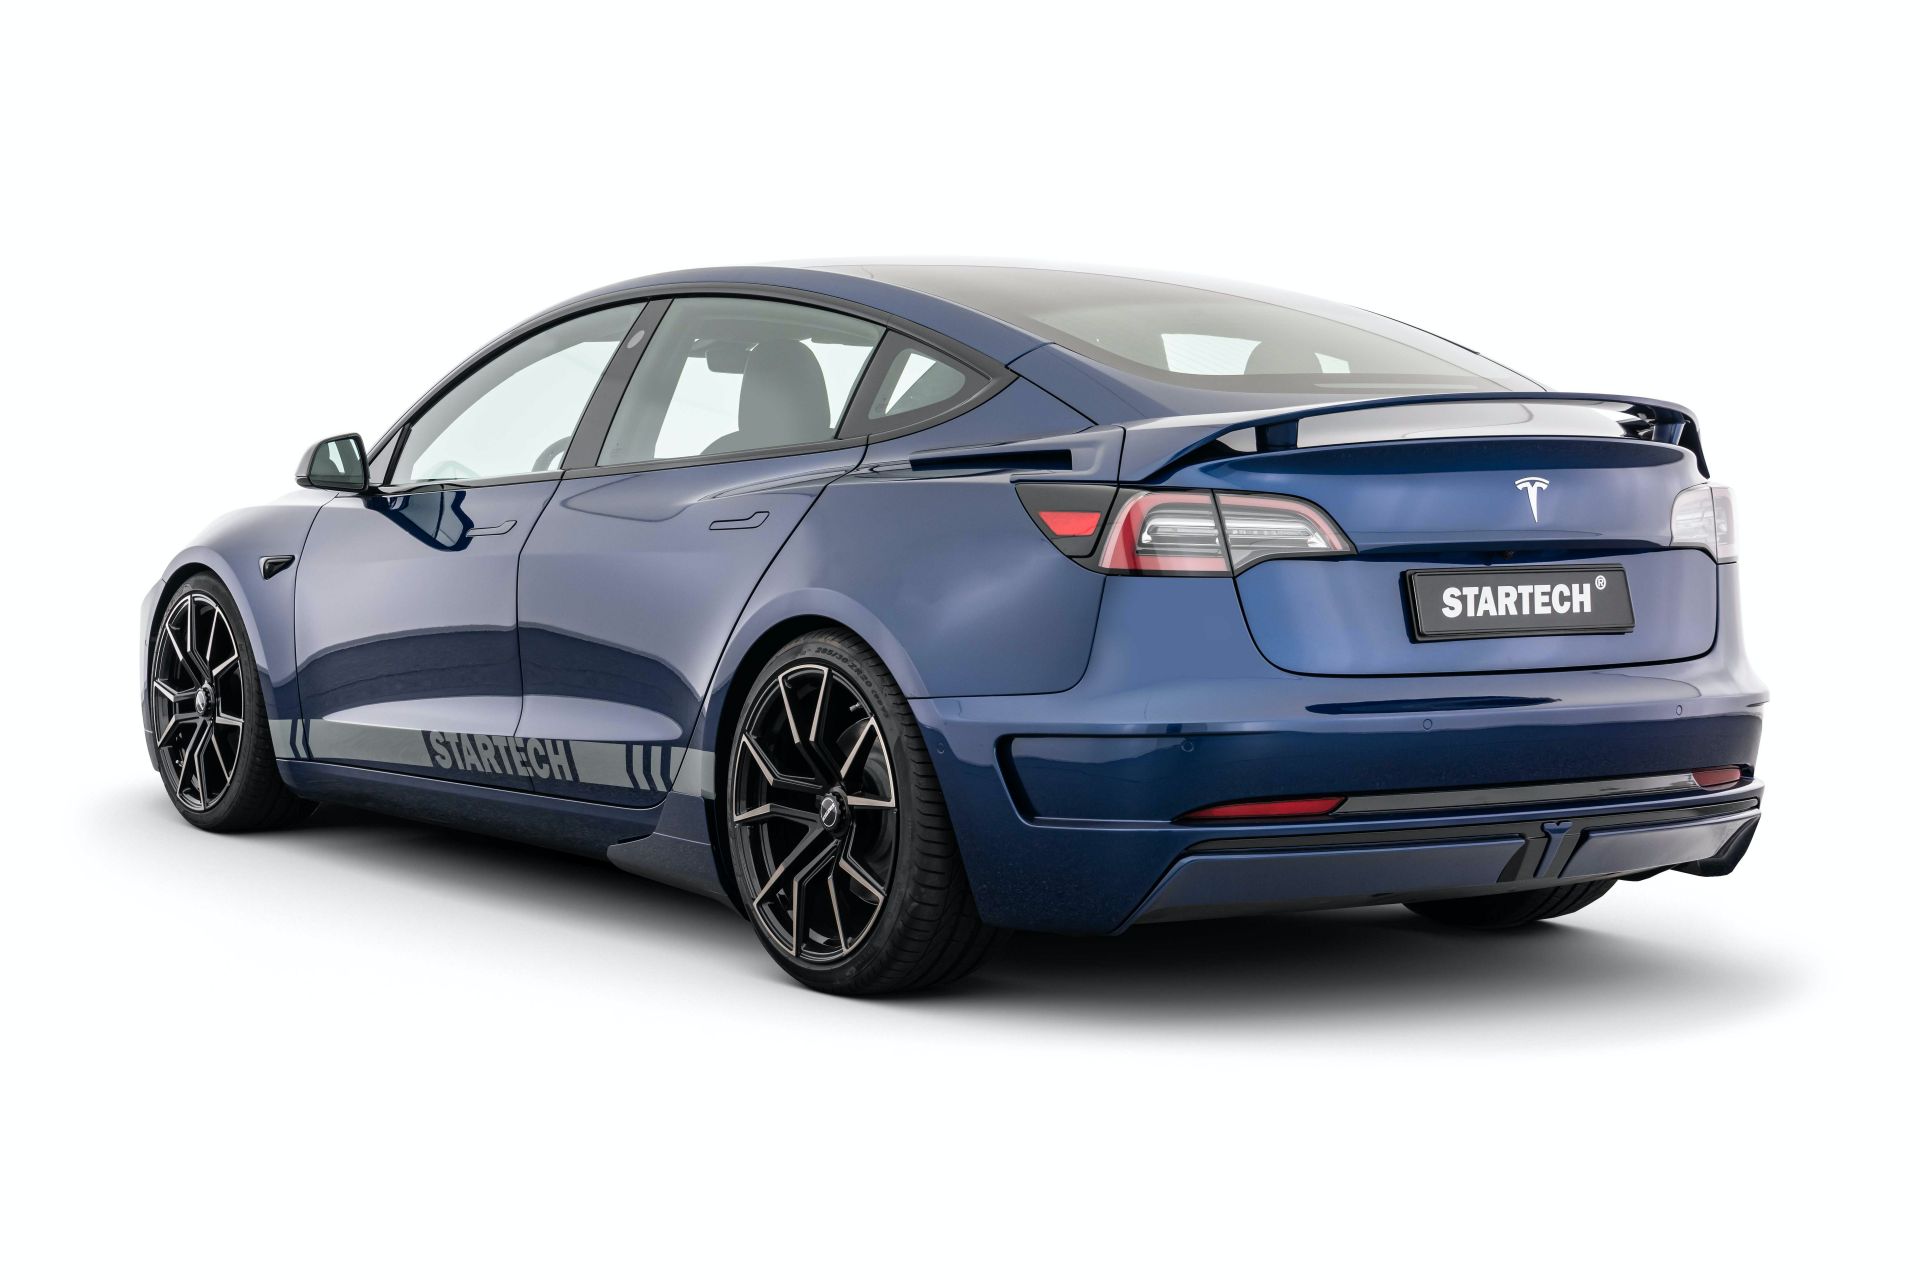 Startech Starts Tuning Teslas, Gives Model 3 A Sporty Makeover | Carscoops